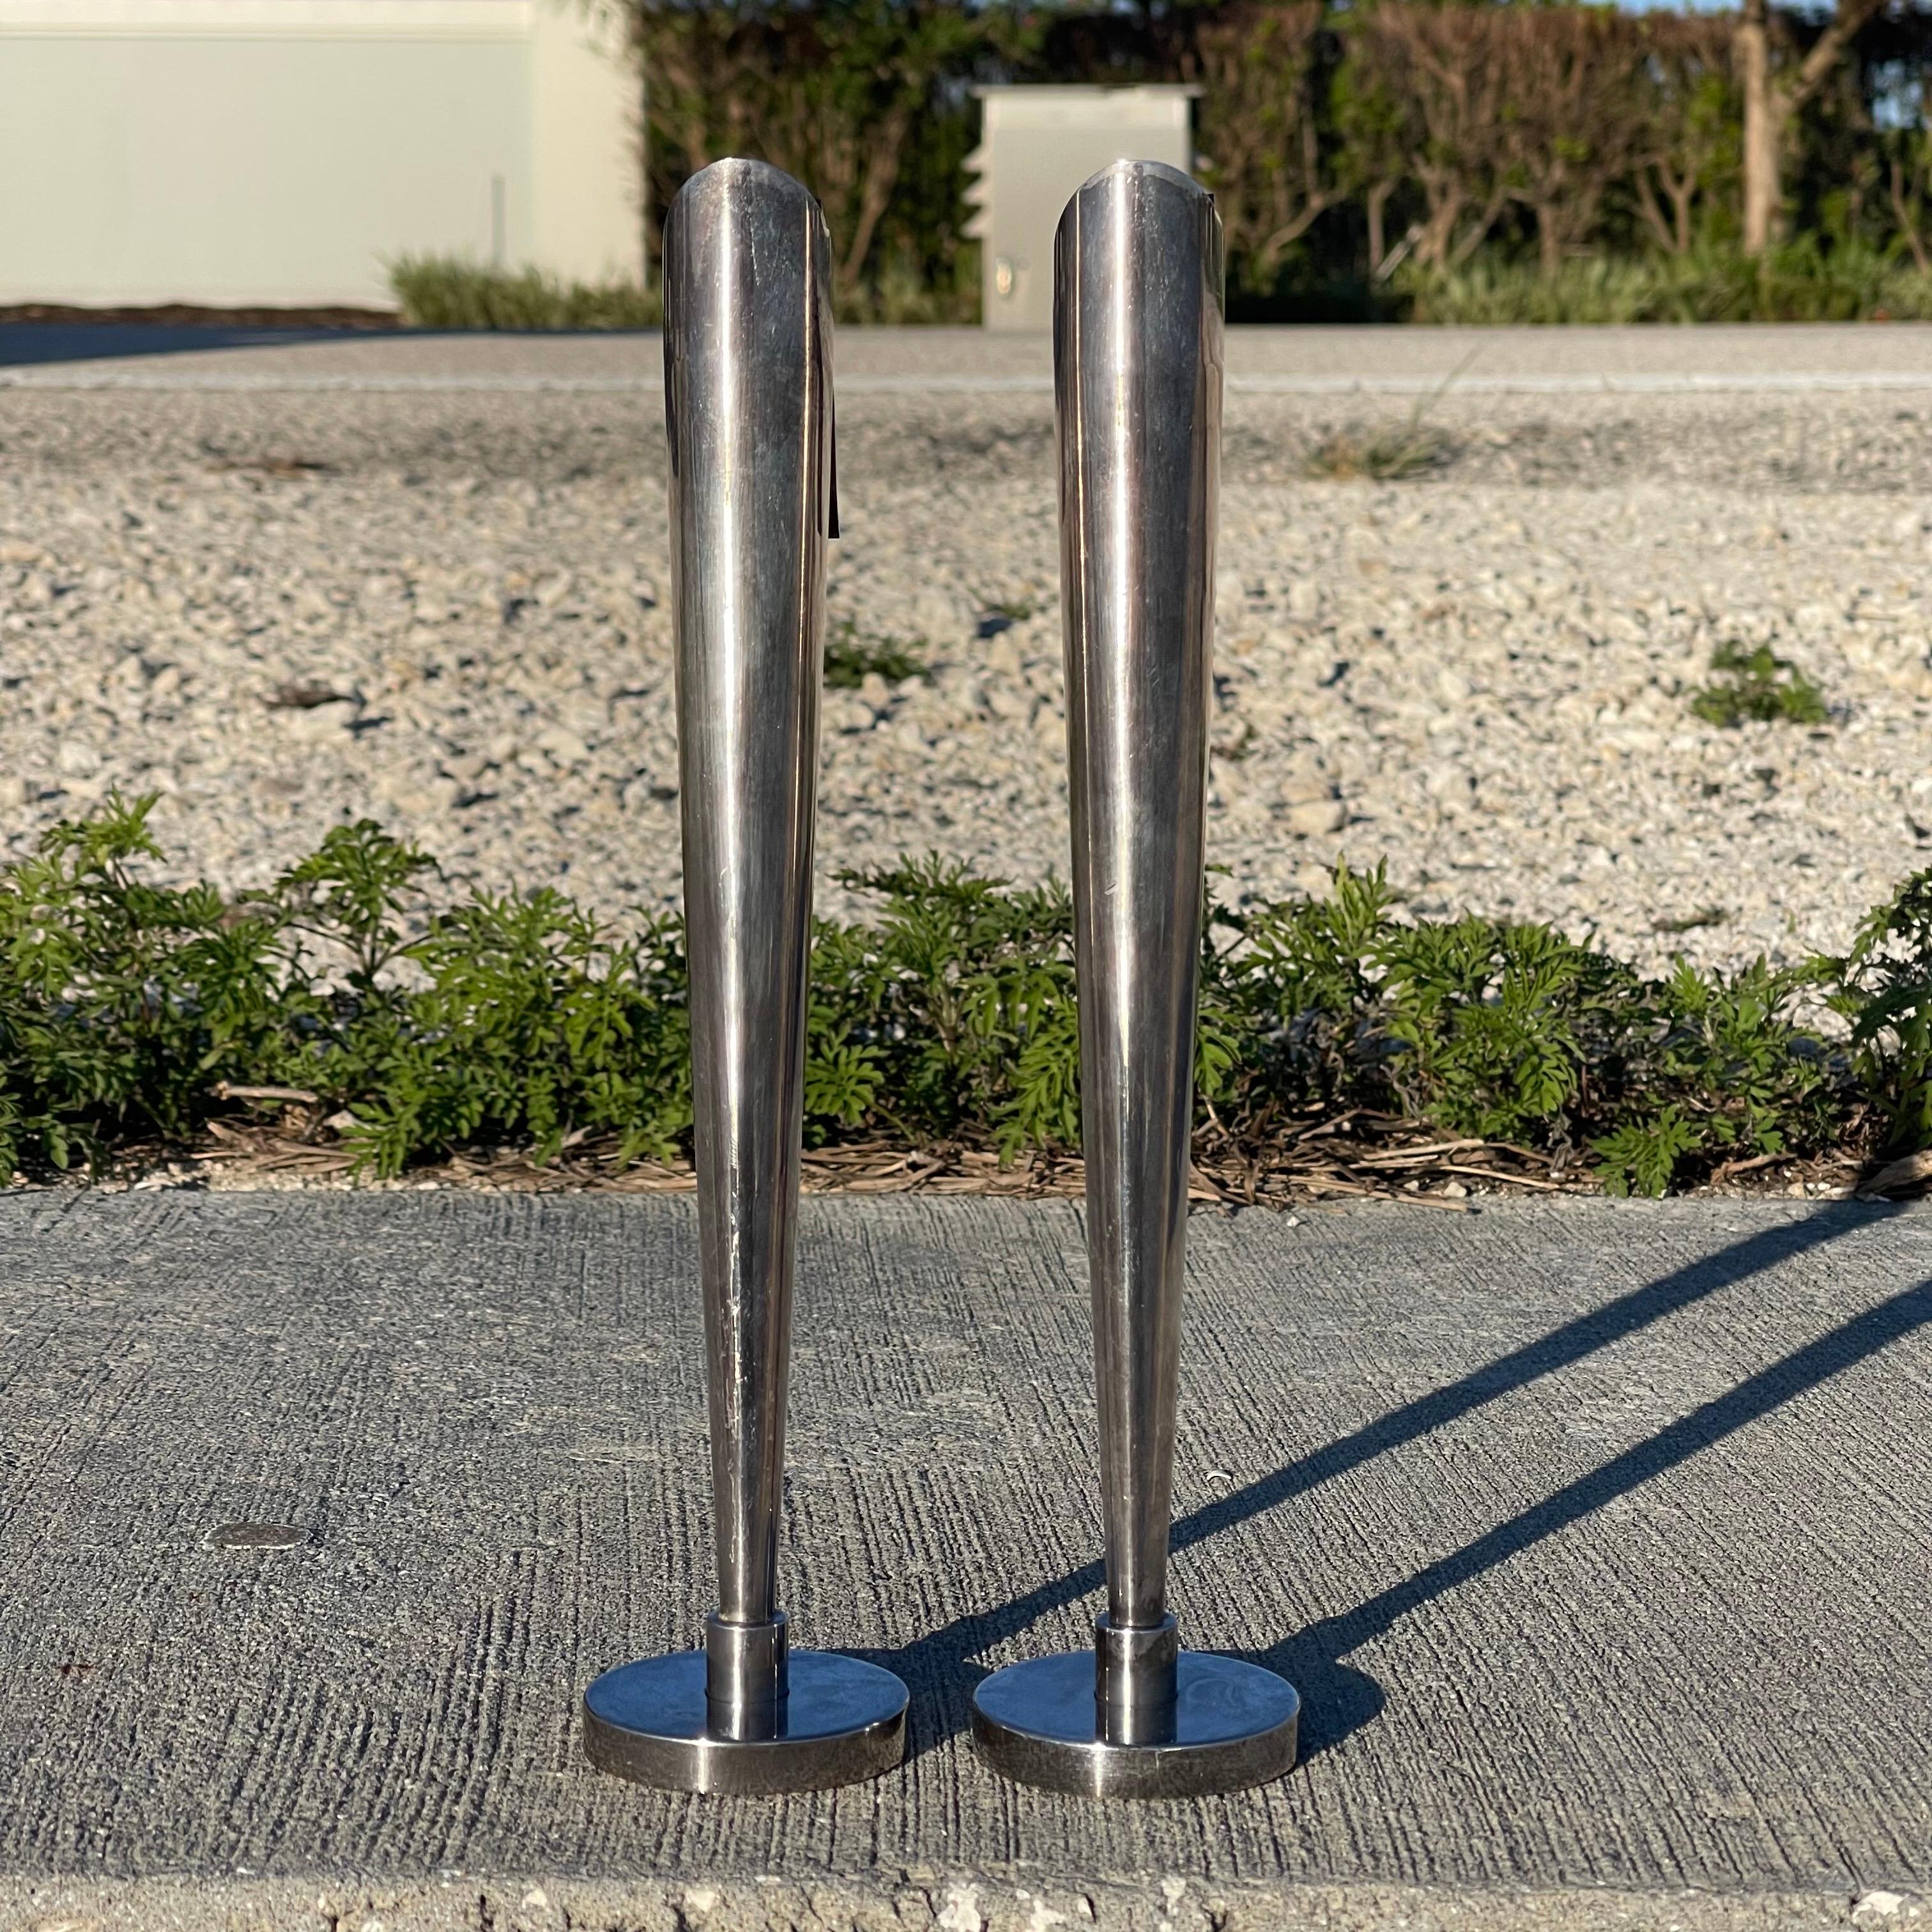 Fabulous, rare pair of candlesticks designed by Christophe Pillet for Algorithme. Silver plate, made in France.